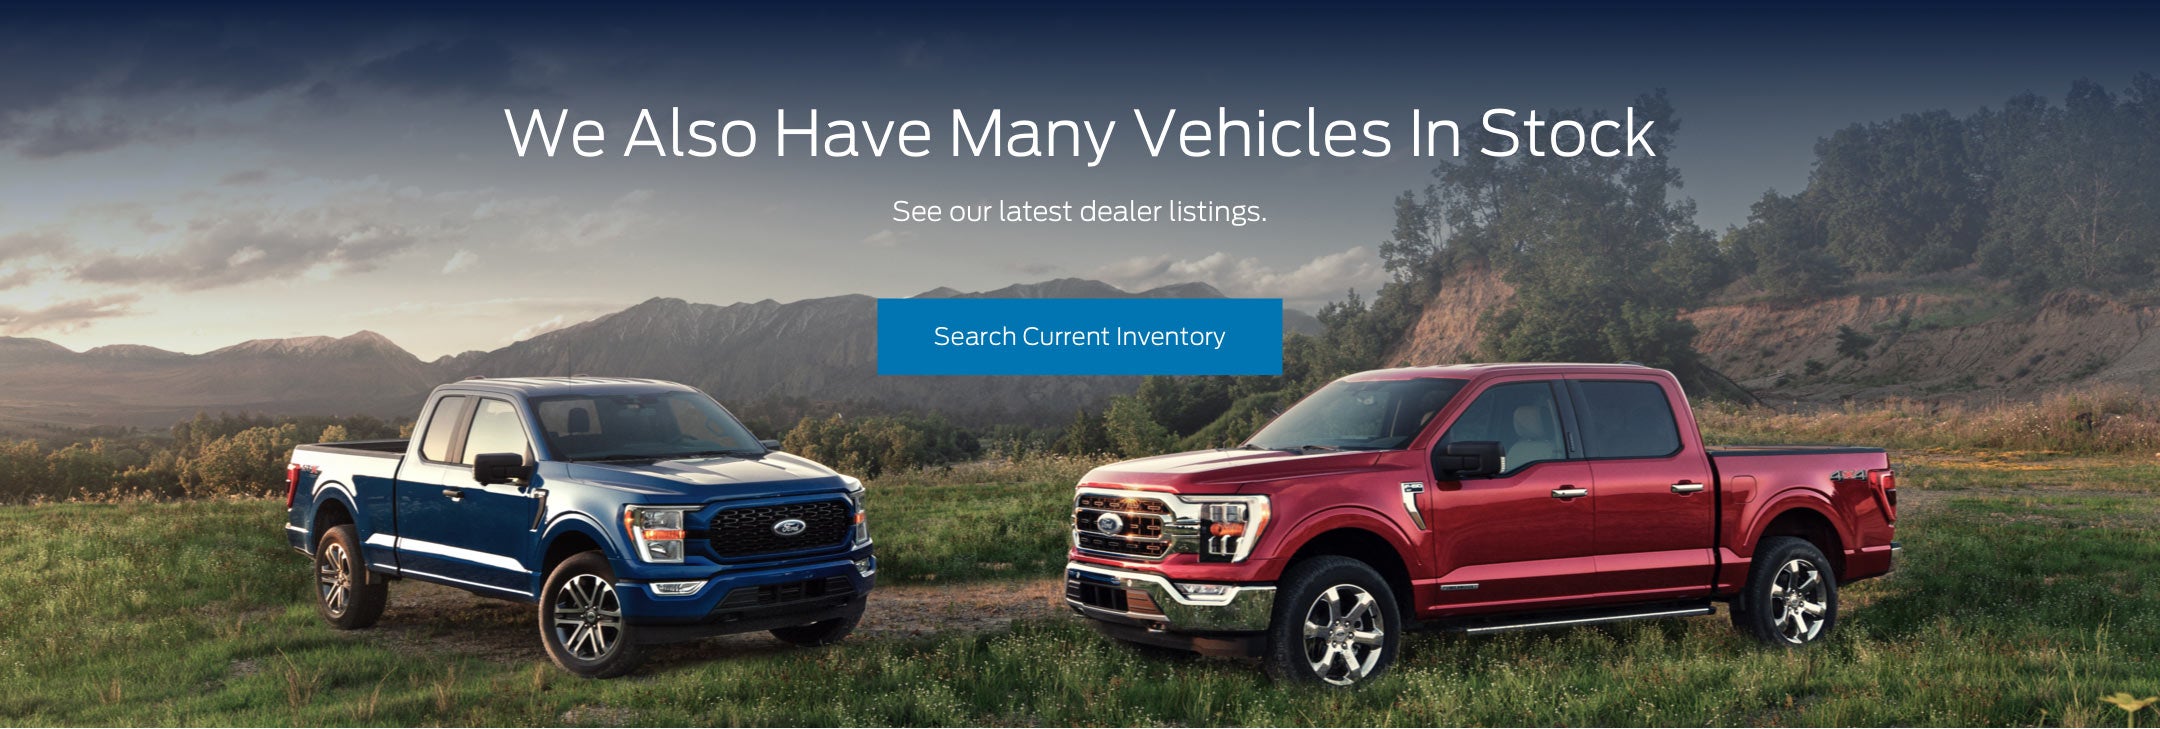 Ford vehicles in stock | Warrensburg Ford in Warrensburg MO